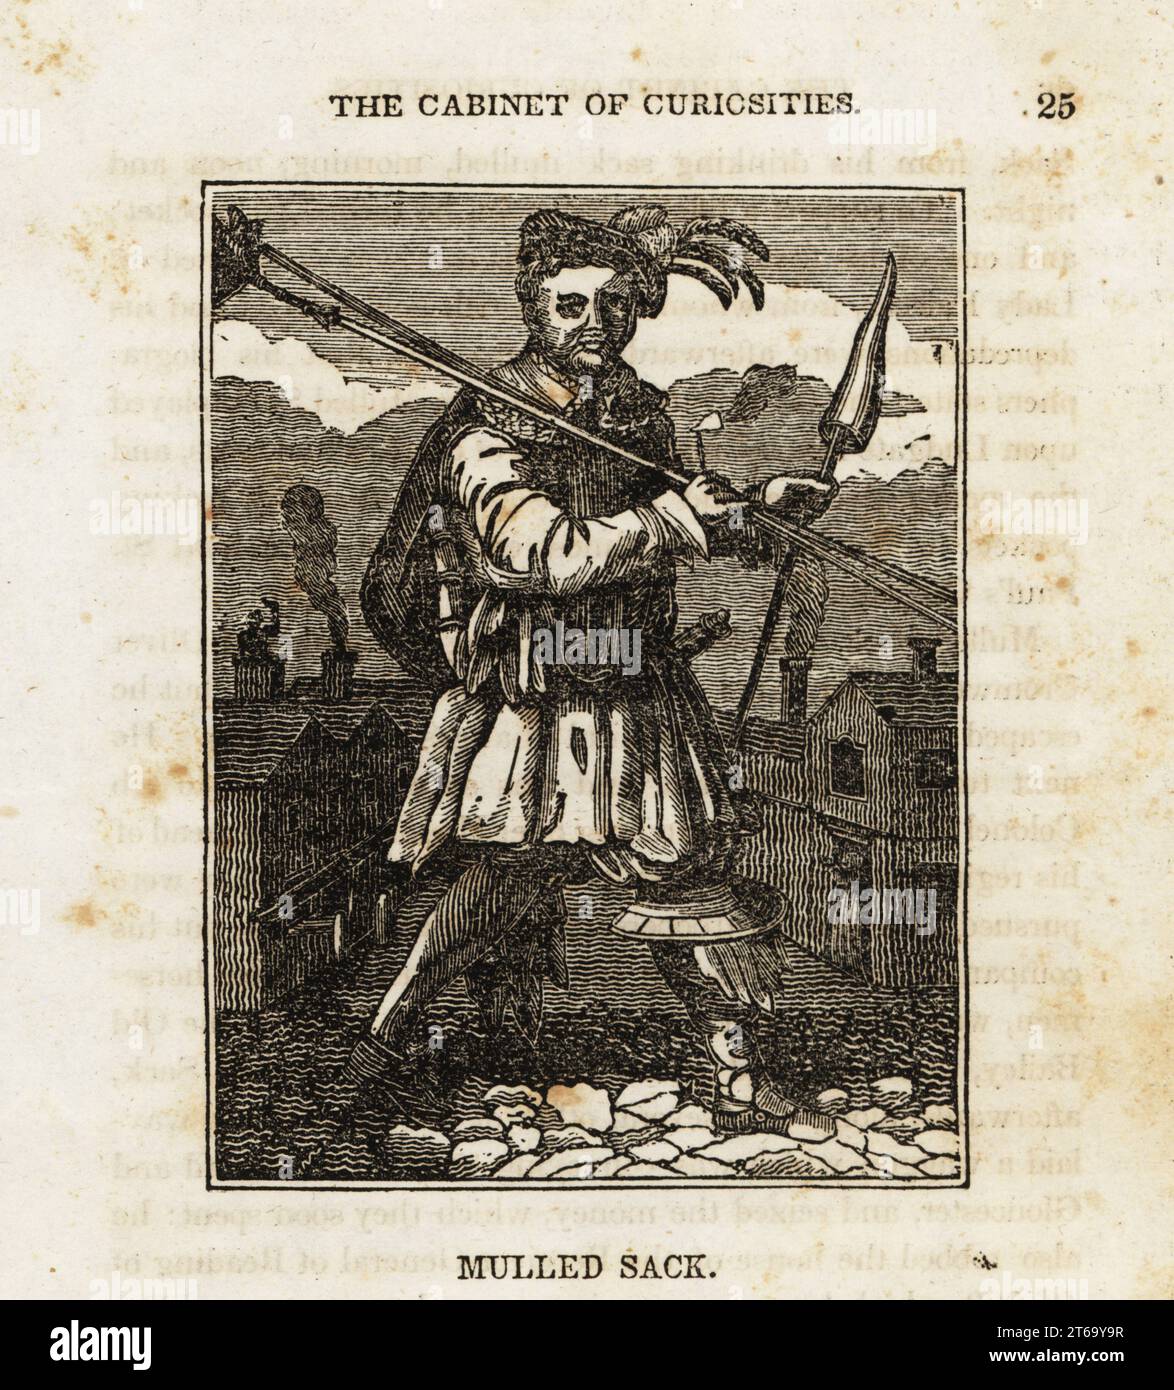 John Cottington or Mulled Sack, notorious pickpocket and later drunken highwayman and murderer. Famous for robbing Oliver Cromwell and King Charles II. Hanged in 1685. Depicted as a chimney sweep. Woodcut from The Cabinet of Curiosities, or Wonders of the World Displayed, Henry Piercy, New York, 1836. Stock Photo